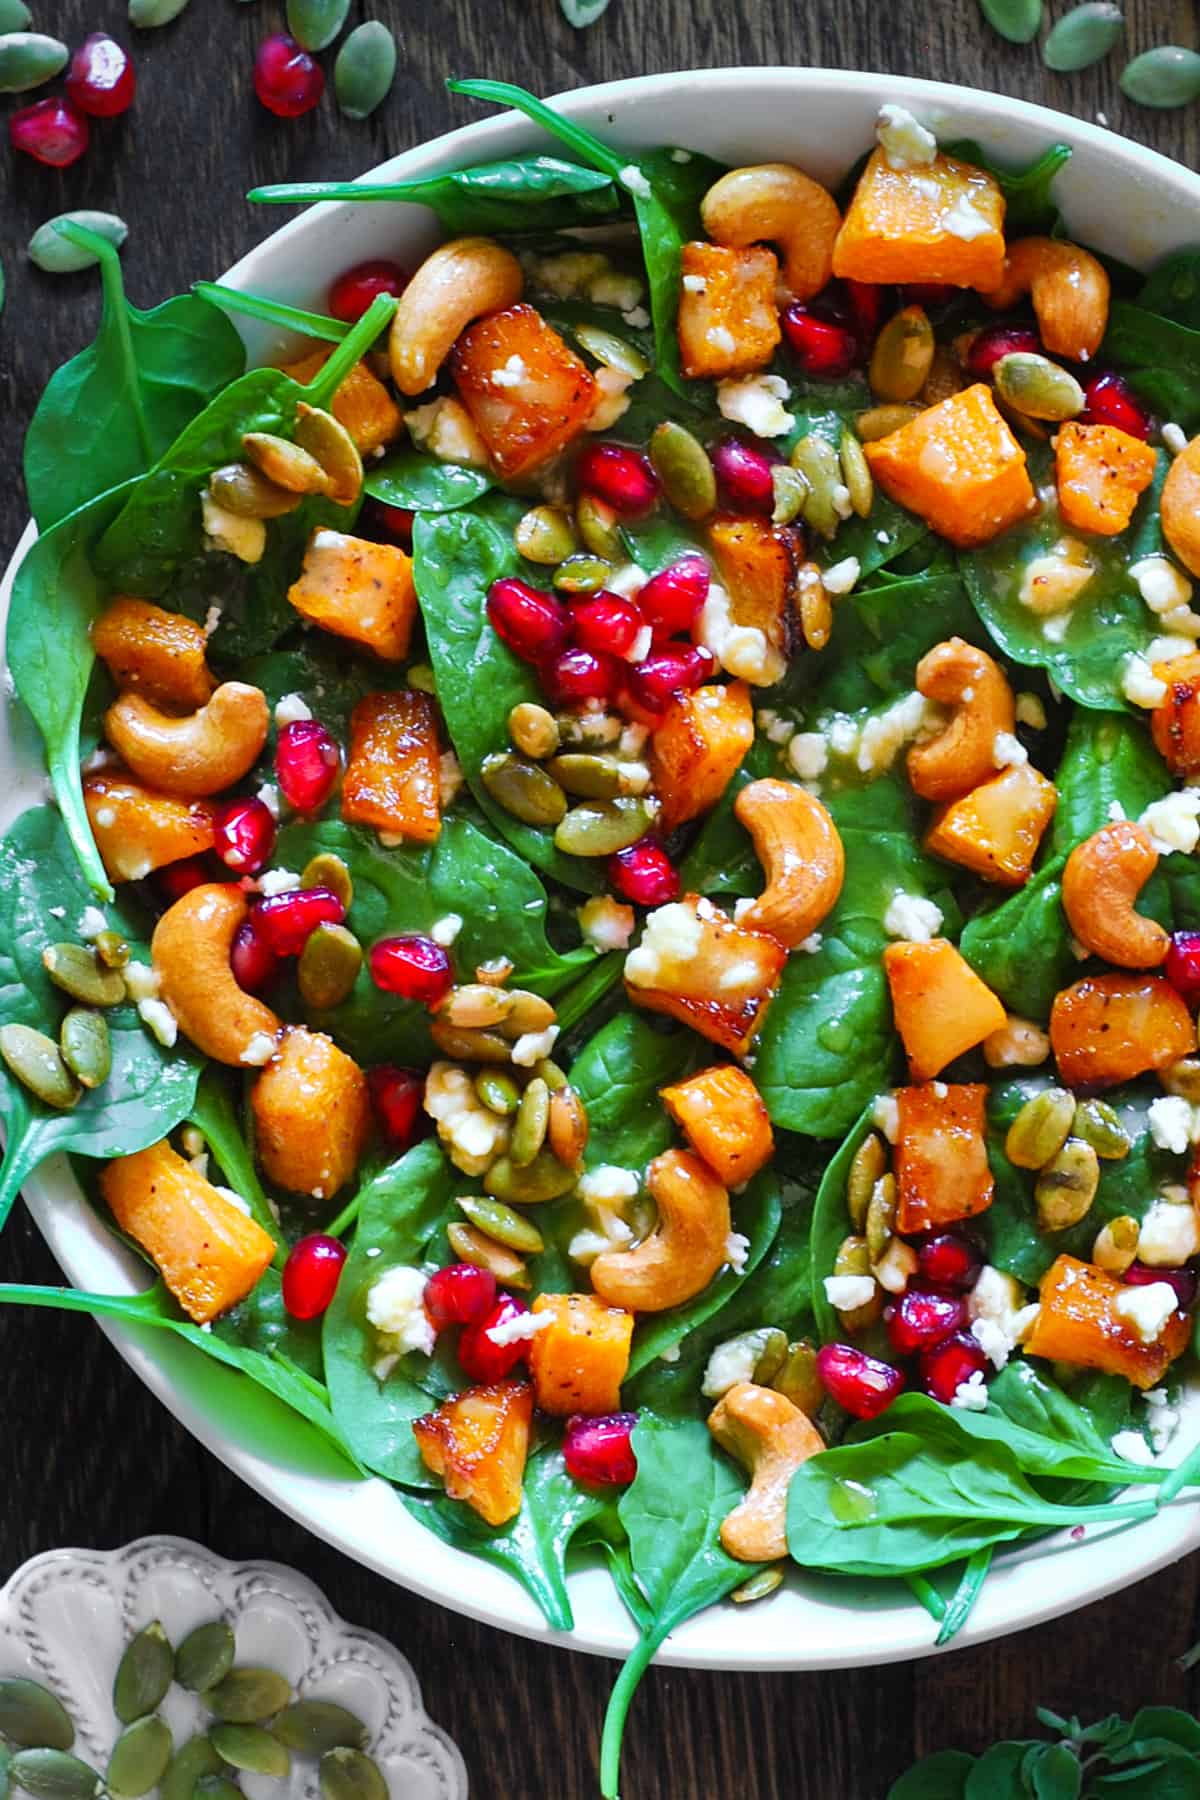 butternut squash salad with baby spinach, roasted cashews, pumpkin seeds, feta cheese, and pomegranate seeds in a white bowl.